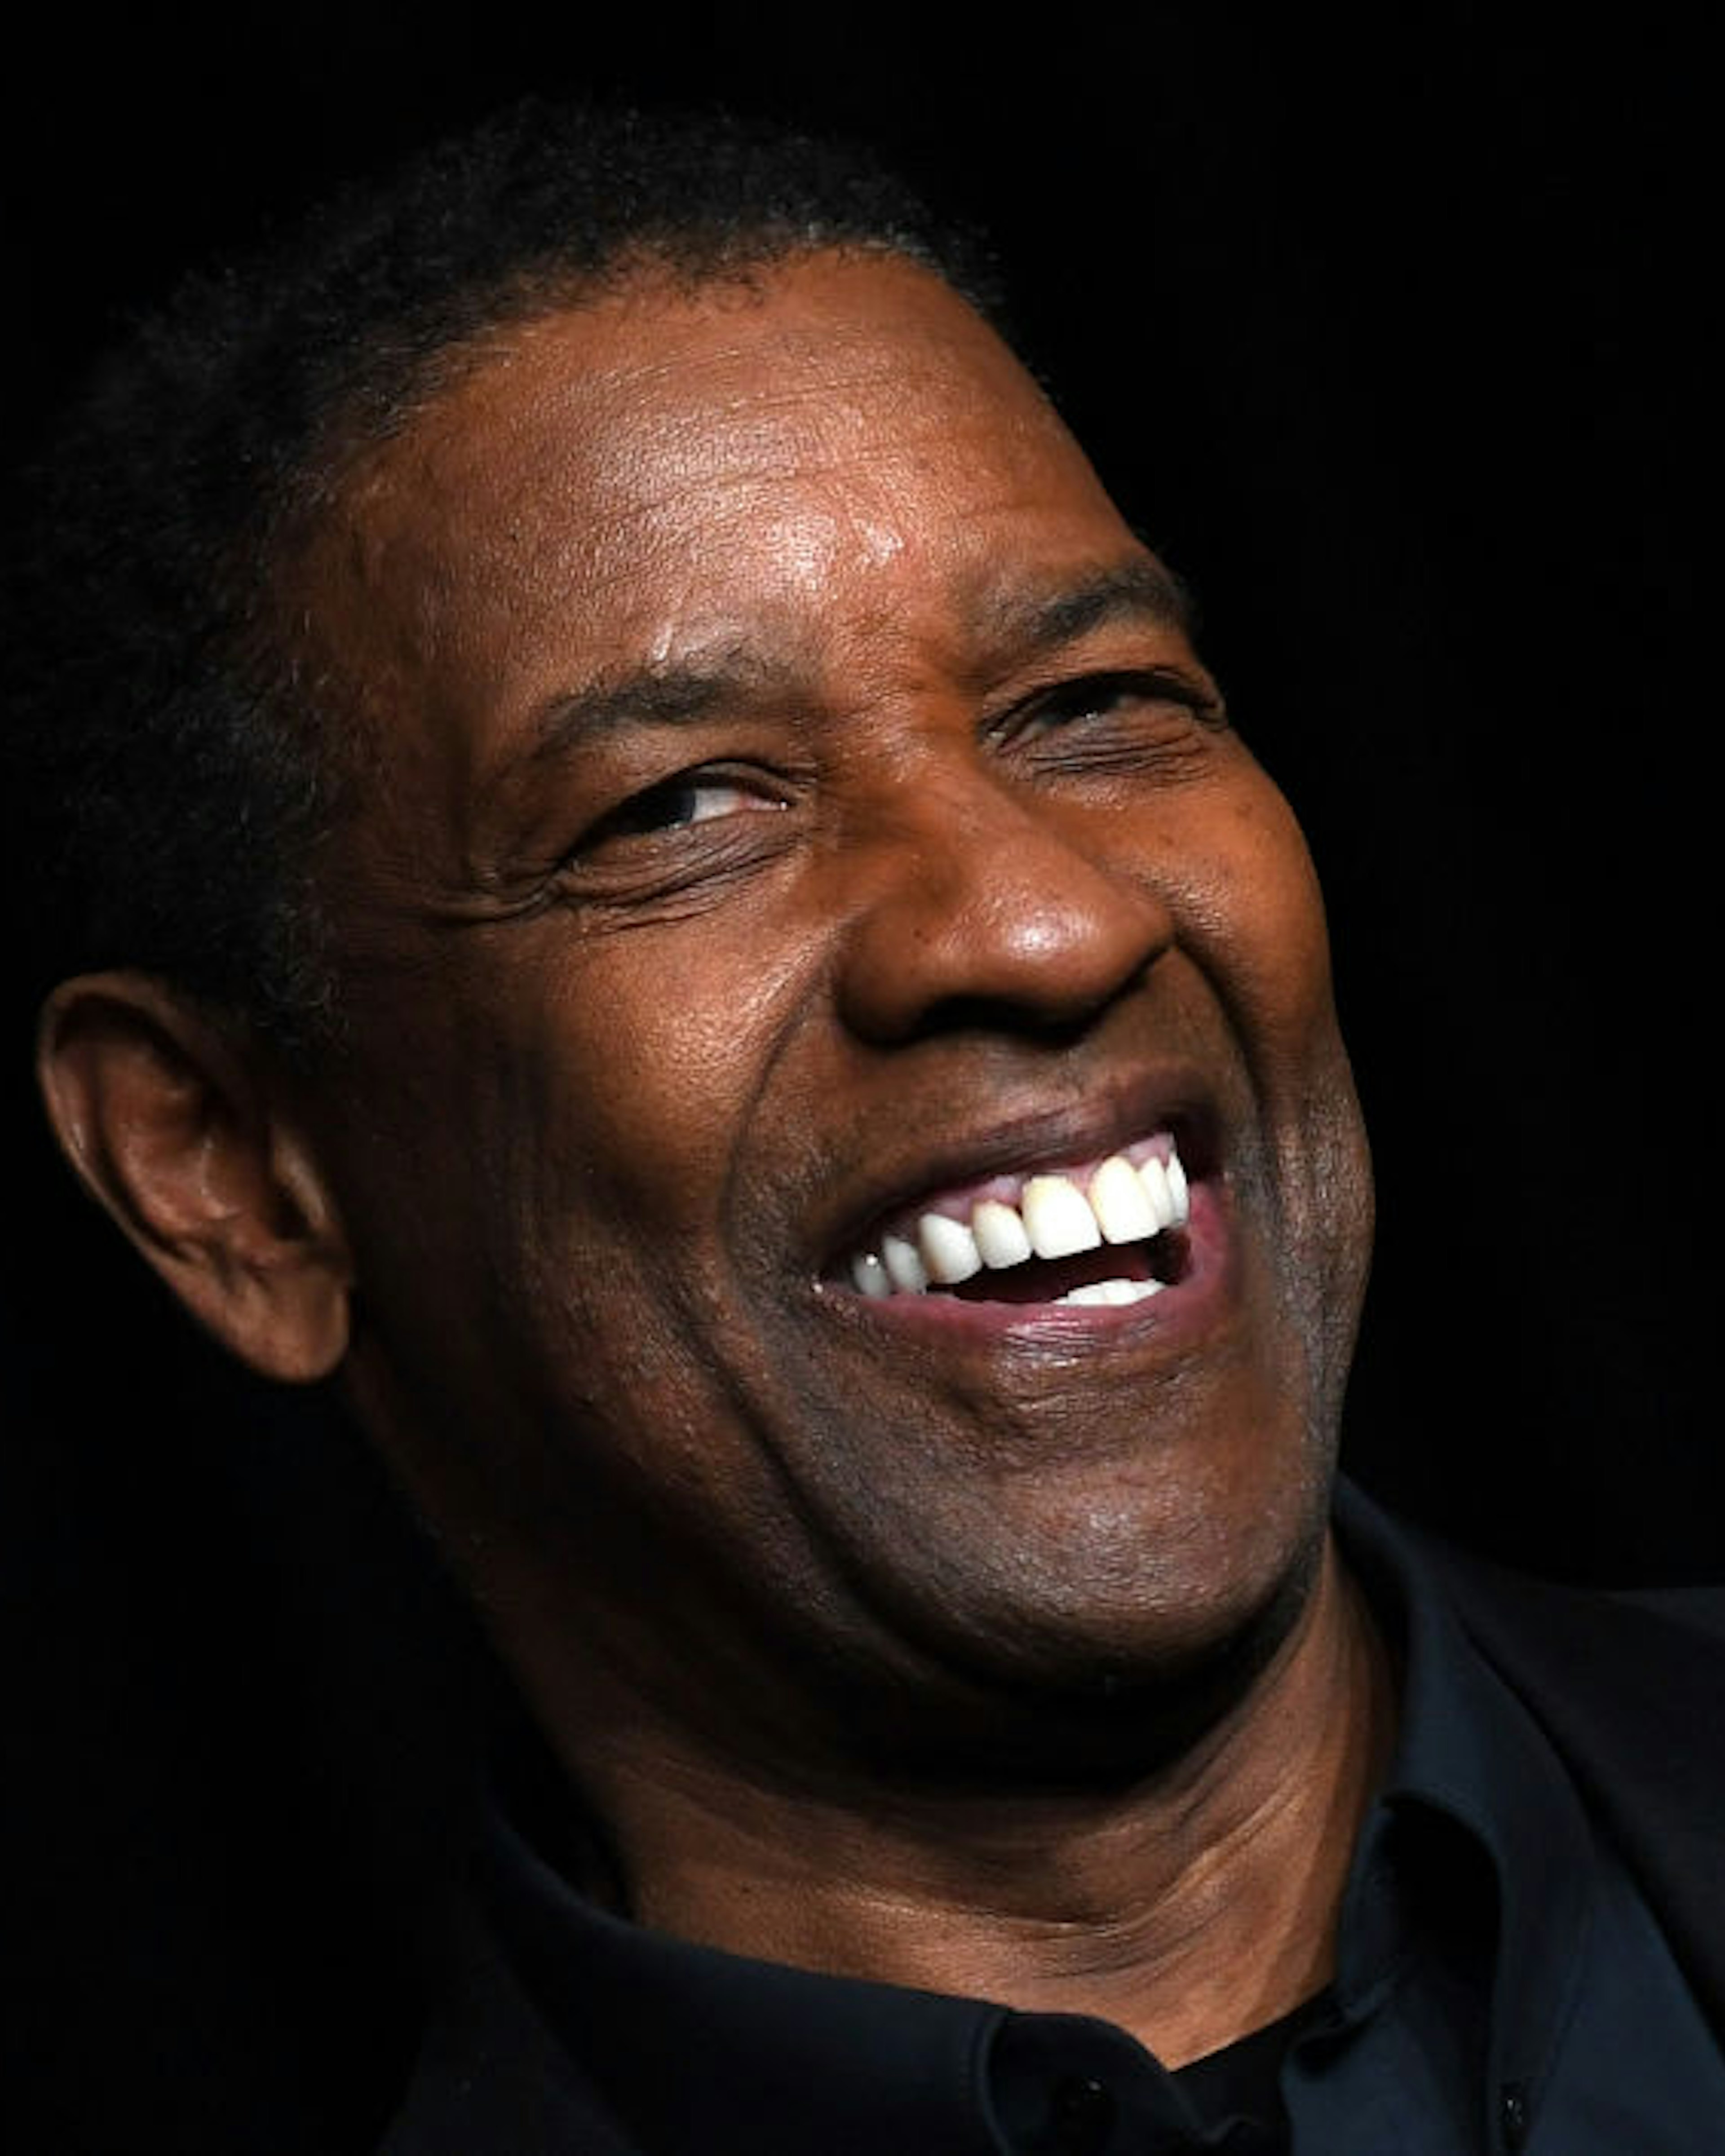 US actor Denzel Washington attends the Sony Pictures Entertainment presentation of "The Equalizer 3" during CinemaCon, the official convention of the National Association of Theatre Owners, at The Colosseum at Caesars Palace on April 24, 2023 in Las Vegas, Nevada. (Photo by VALERIE MACON / AFP) (Photo by VALERIE MACON/AFP via Getty Images)